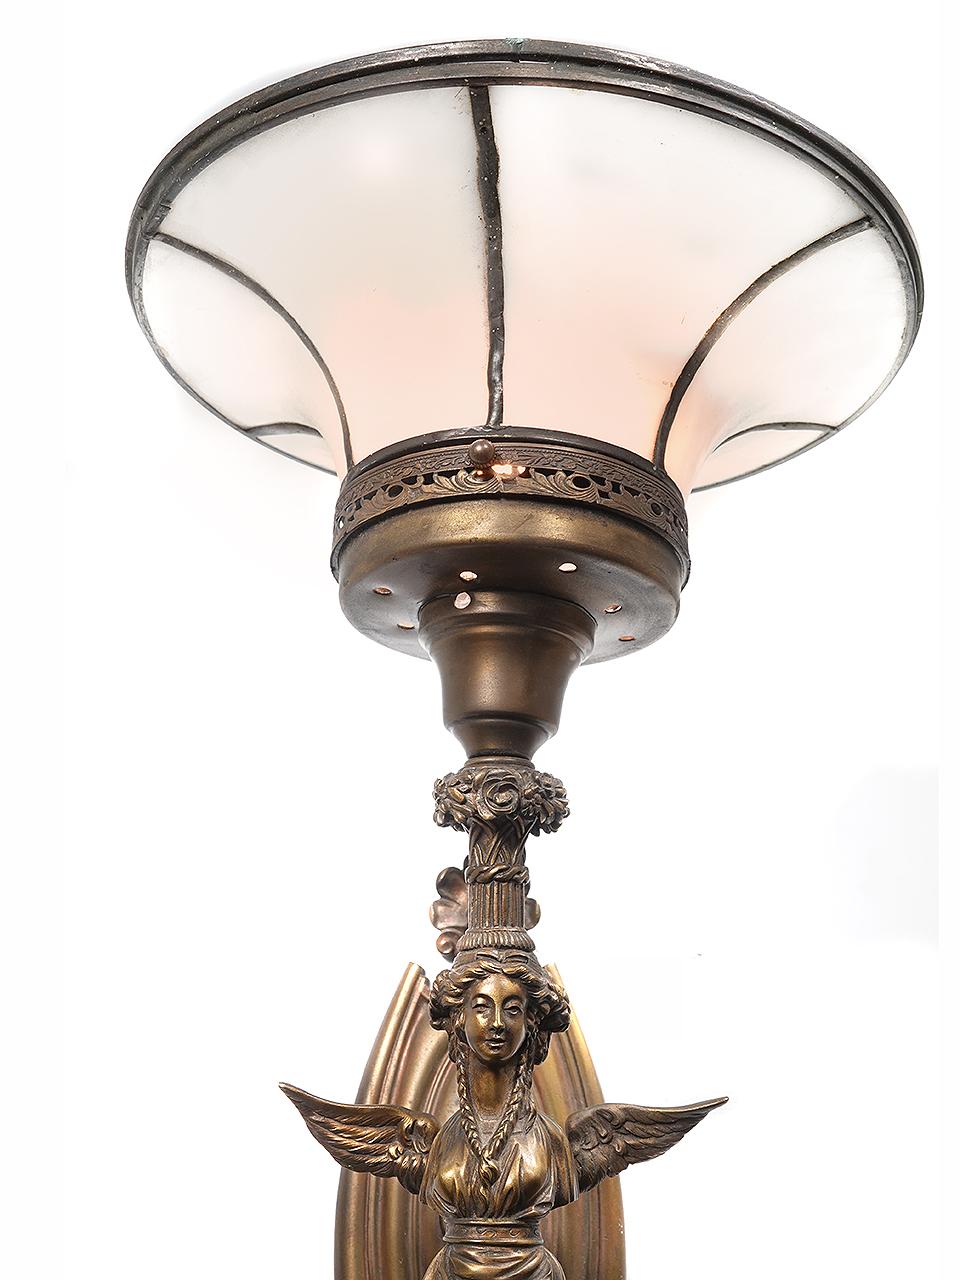 This is an impressive torch sconce that is 3 foot tall. This example has a flared leaded glass shade that gives it a unique and rich look. The bronze casting is nicely detailed with a winged angel and floral details.The shade has a 12 inch diameter.